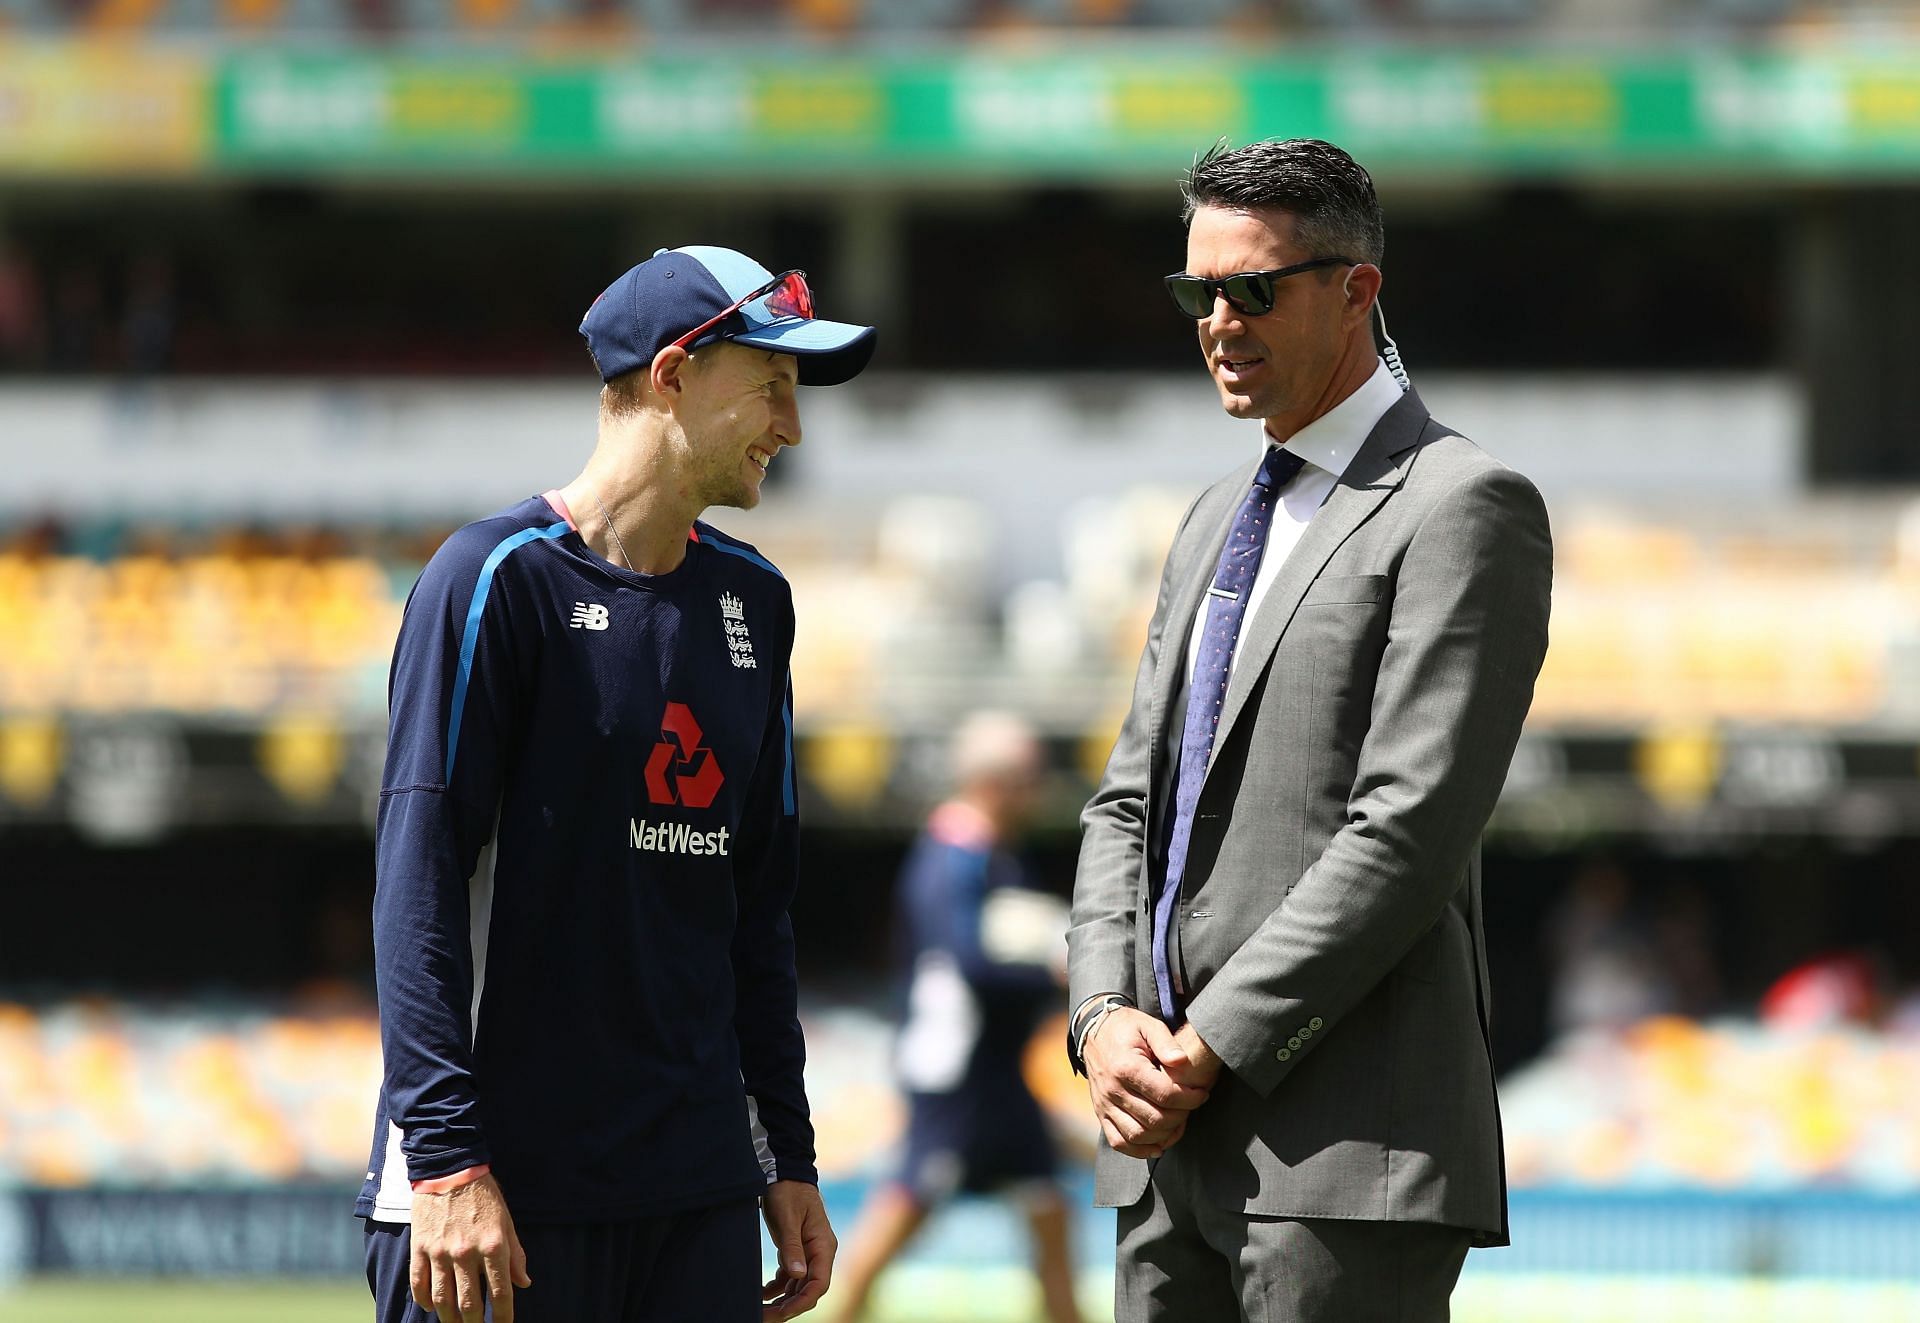 Joe Root (L) and Kevin Pietersen. (Image: Getty)